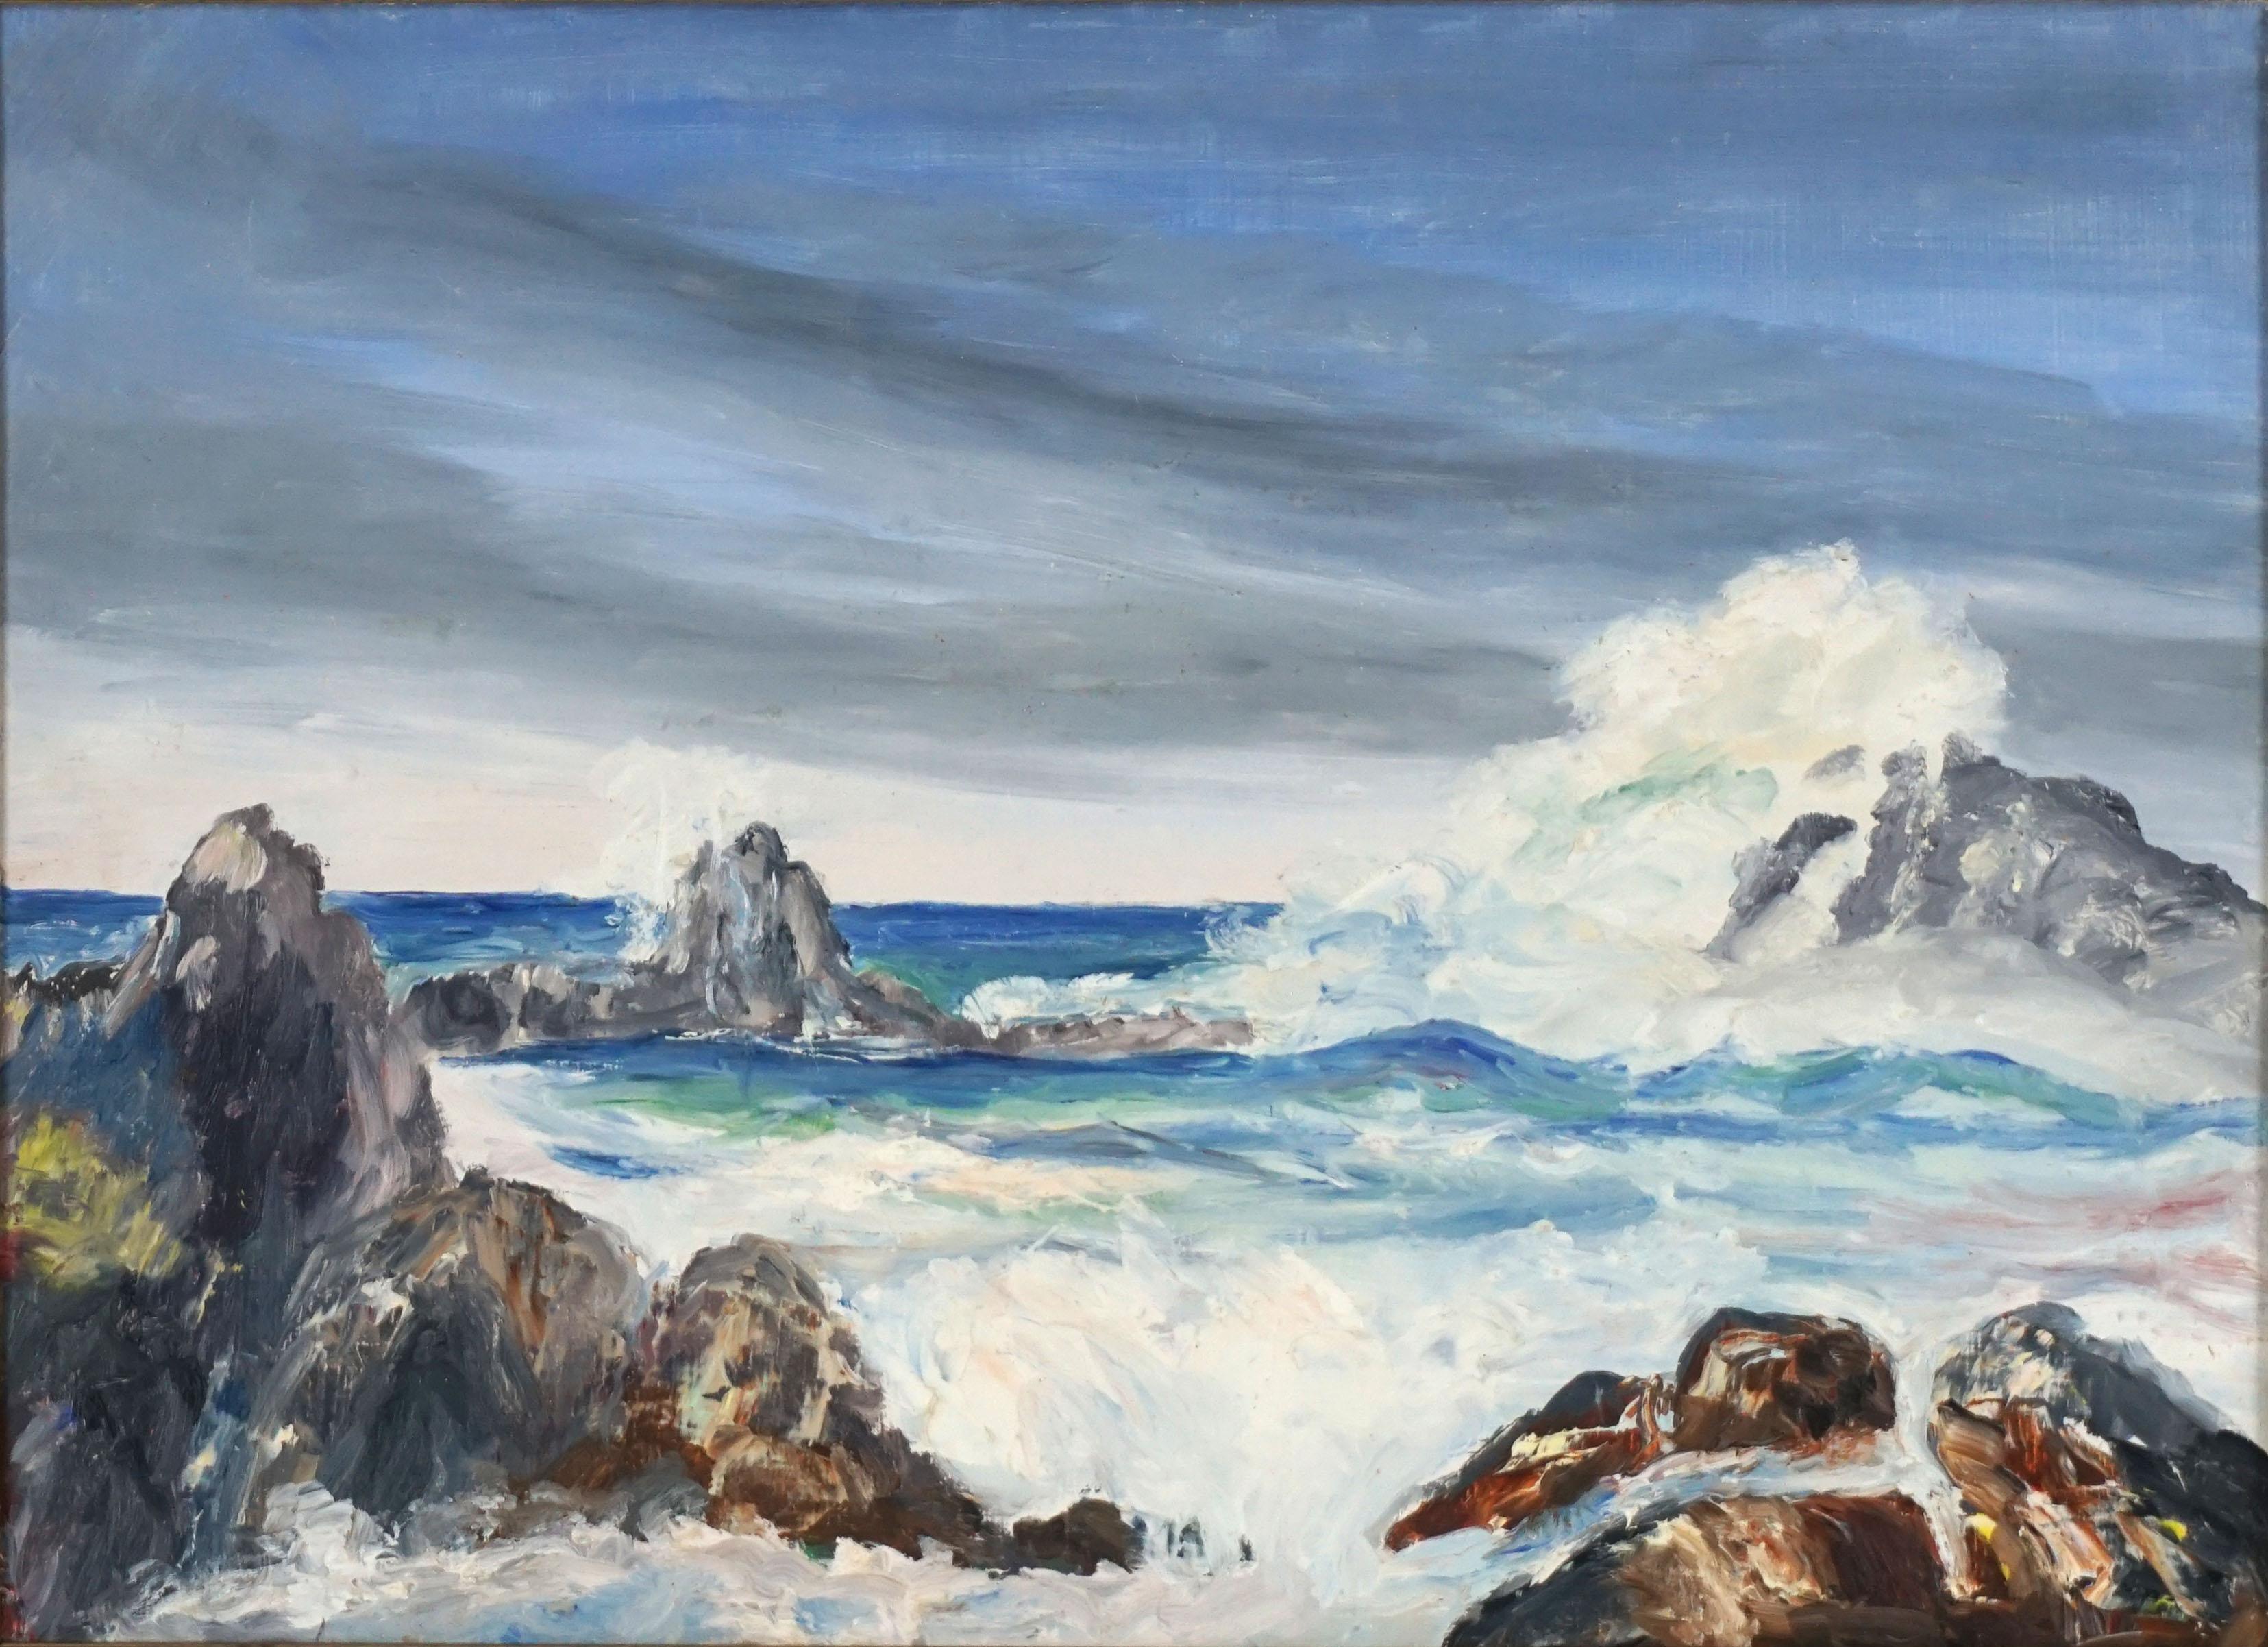 Mid Century Original Big Sur Seascape Oil Painting

Gorgeous mid century Big Sur seascape oil painting by California artist Hartzell Harrison Ray (American, 1896-1991). Blue and aqua hues of the waves crashing on rocks of Big sur are enhanced with